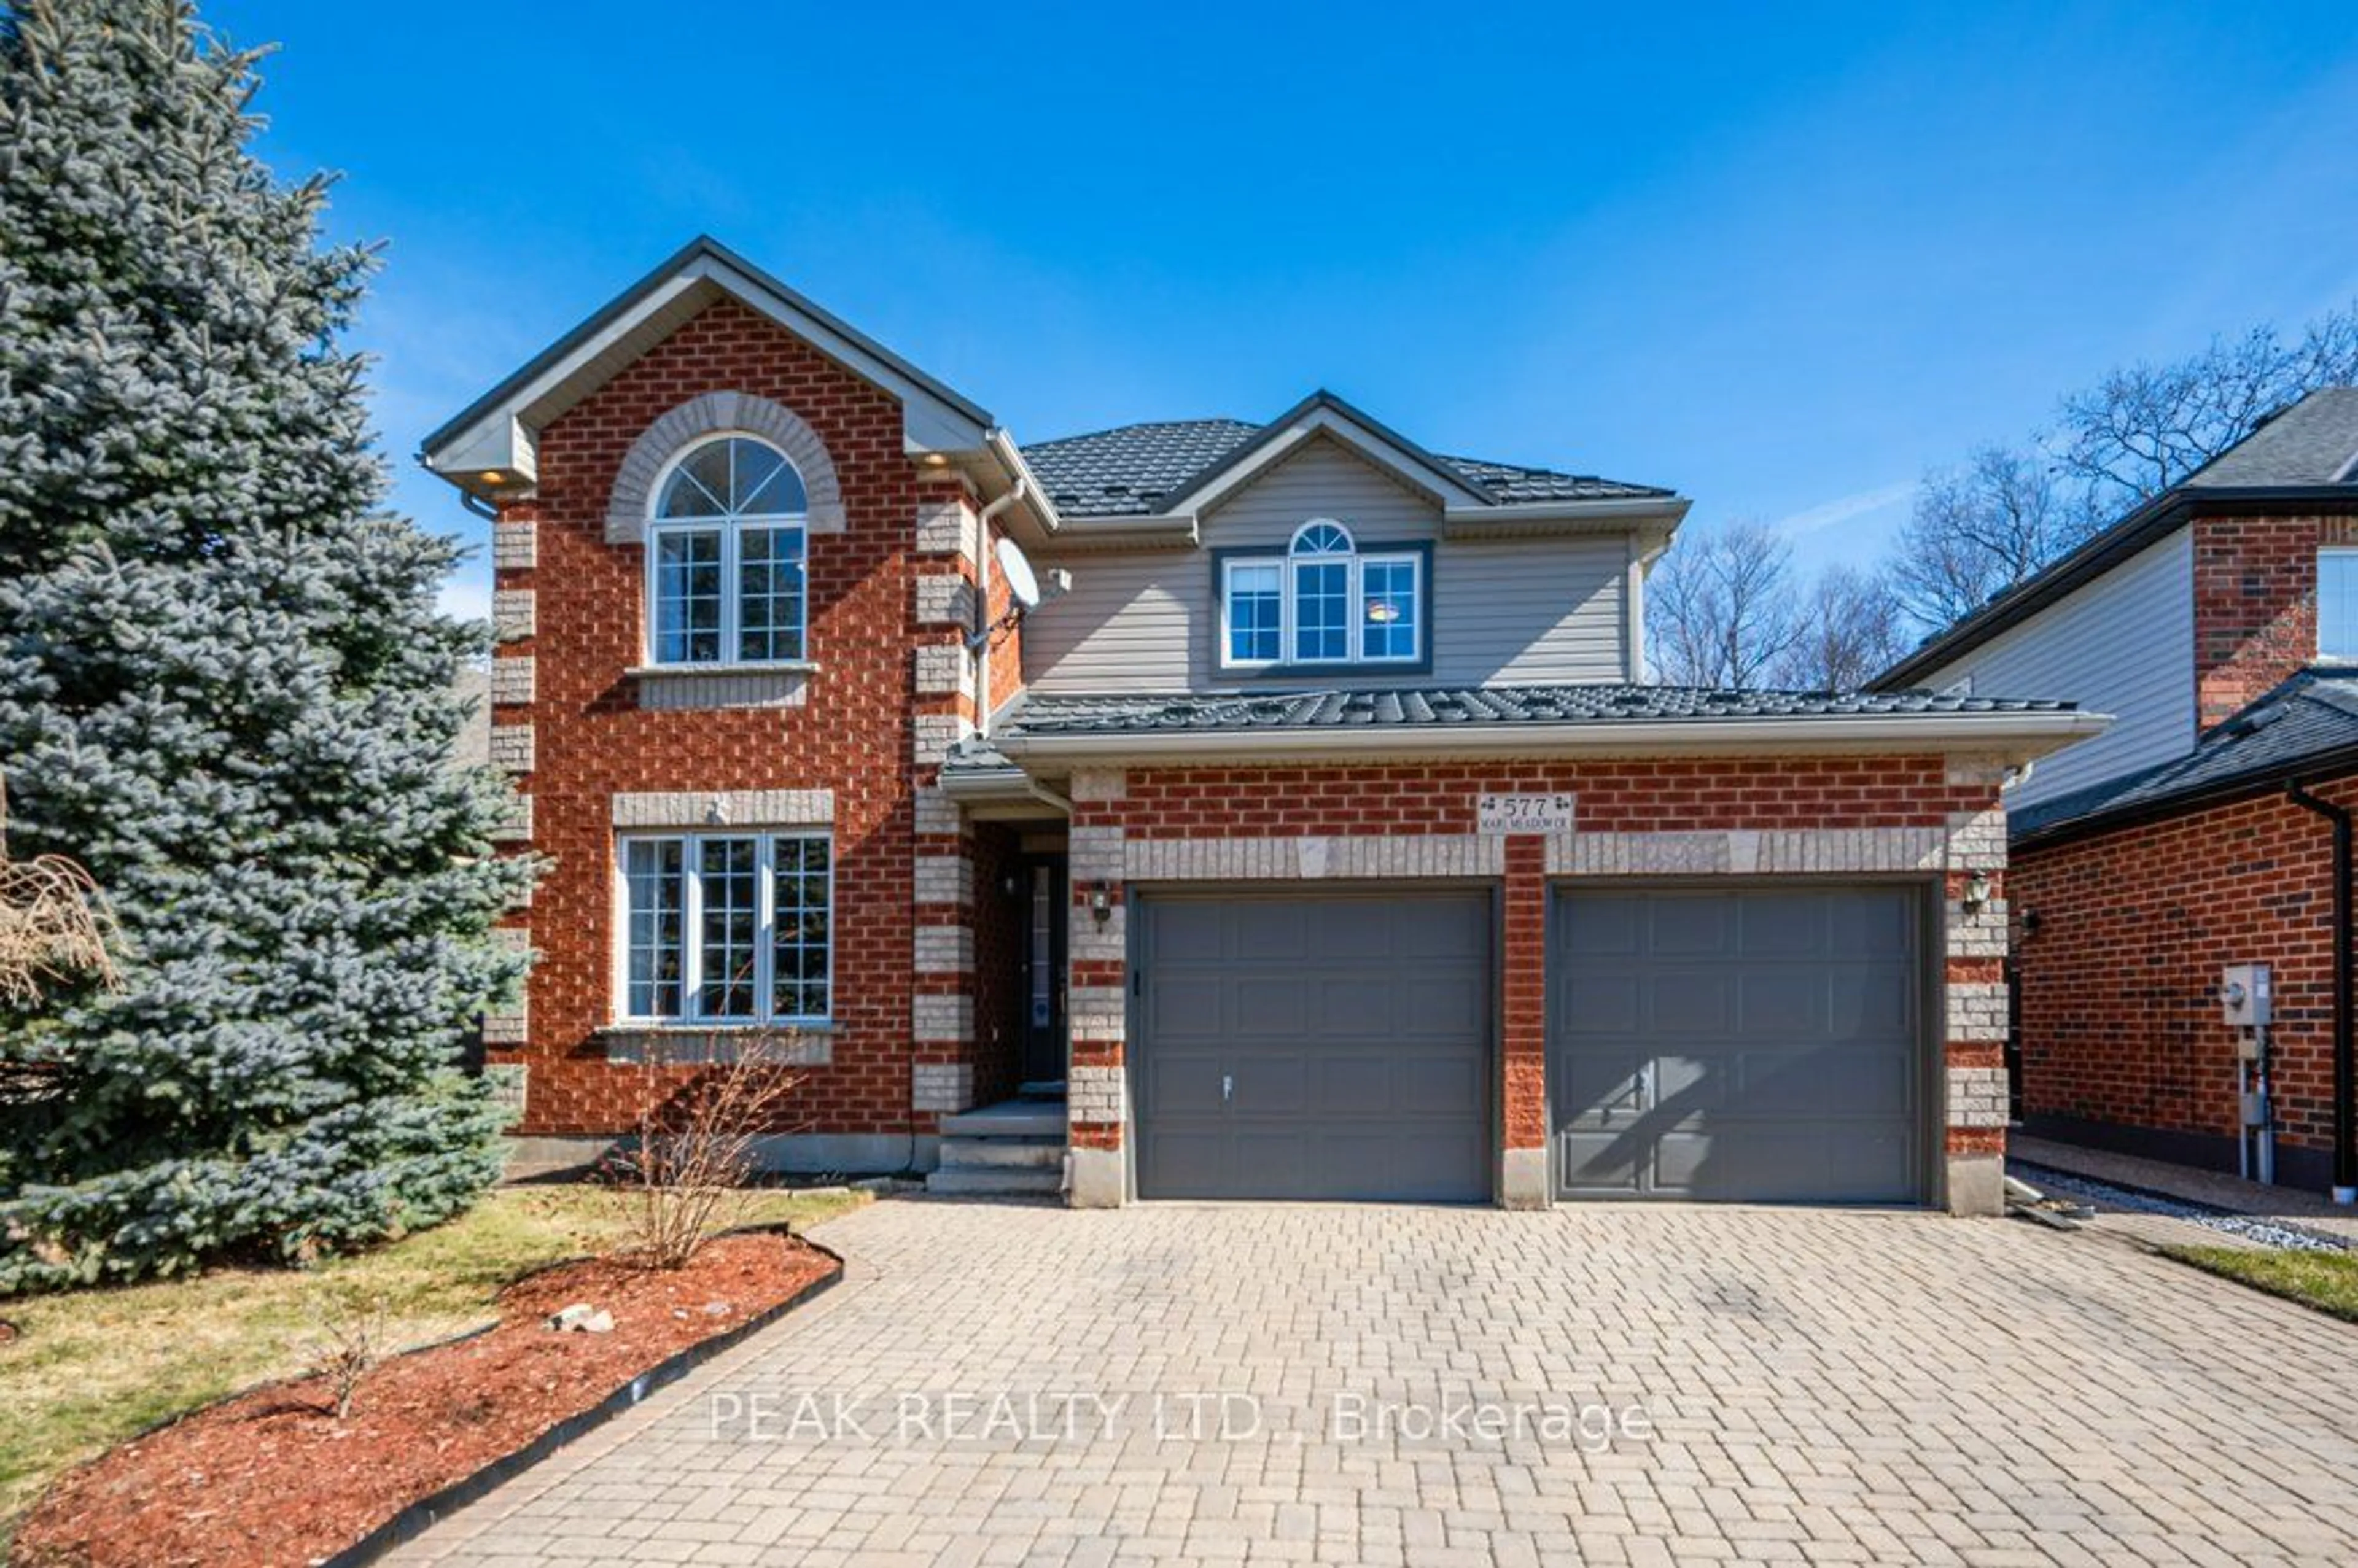 Home with brick exterior material for 577 Marl Meadow Cres, Kitchener Ontario N2R 1L2